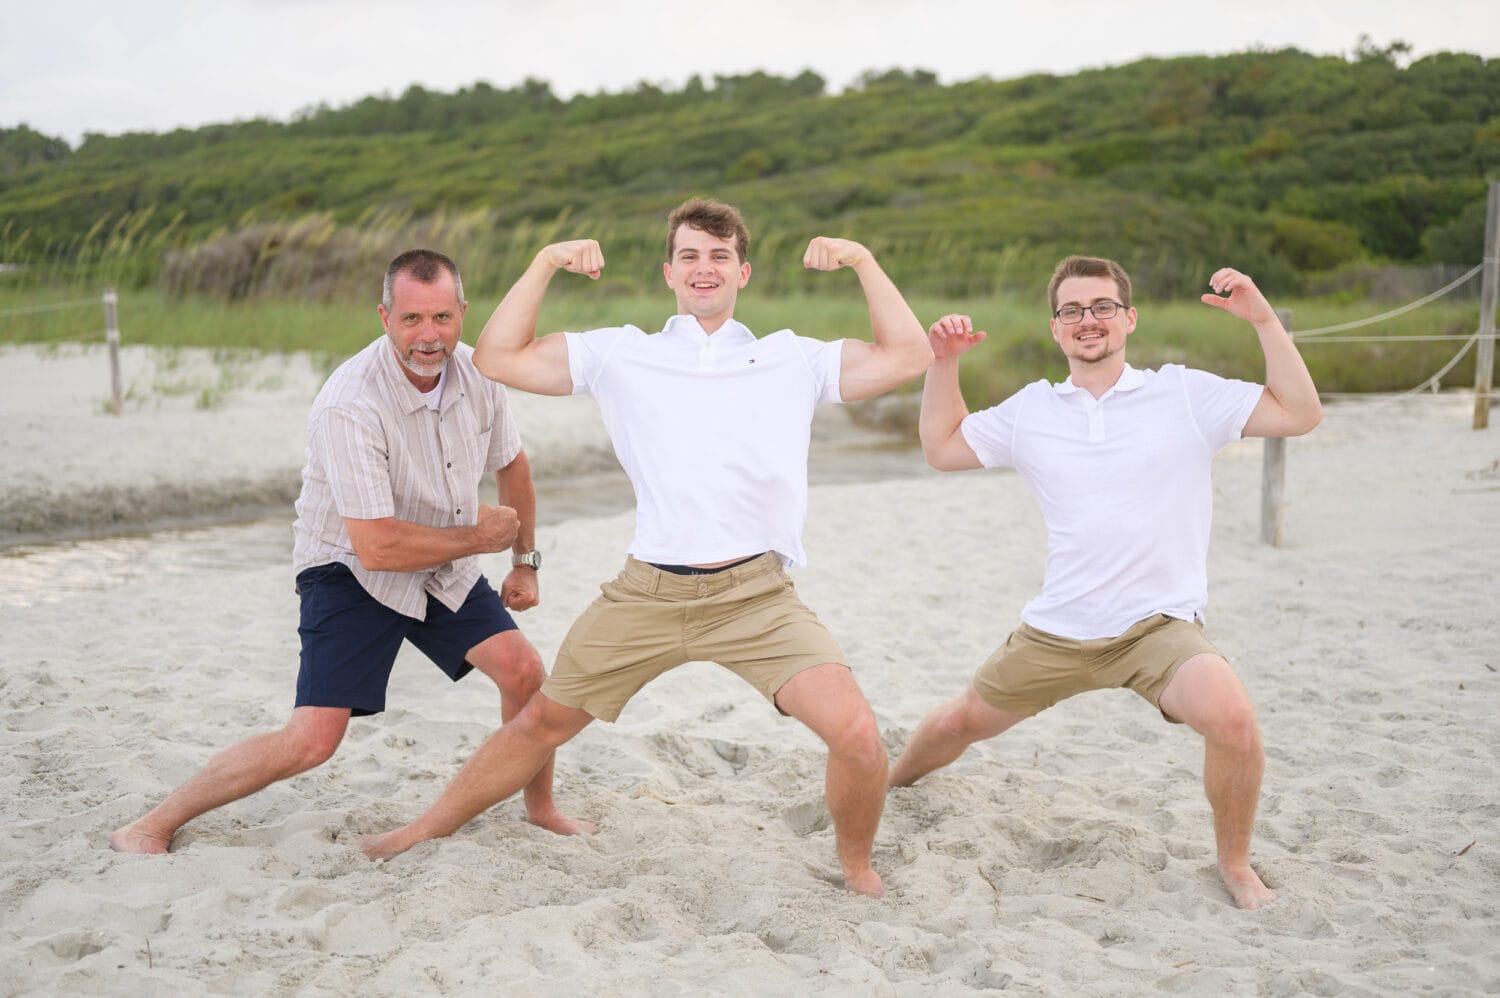 Guys showing their muscles - Myrtle Beach State Park